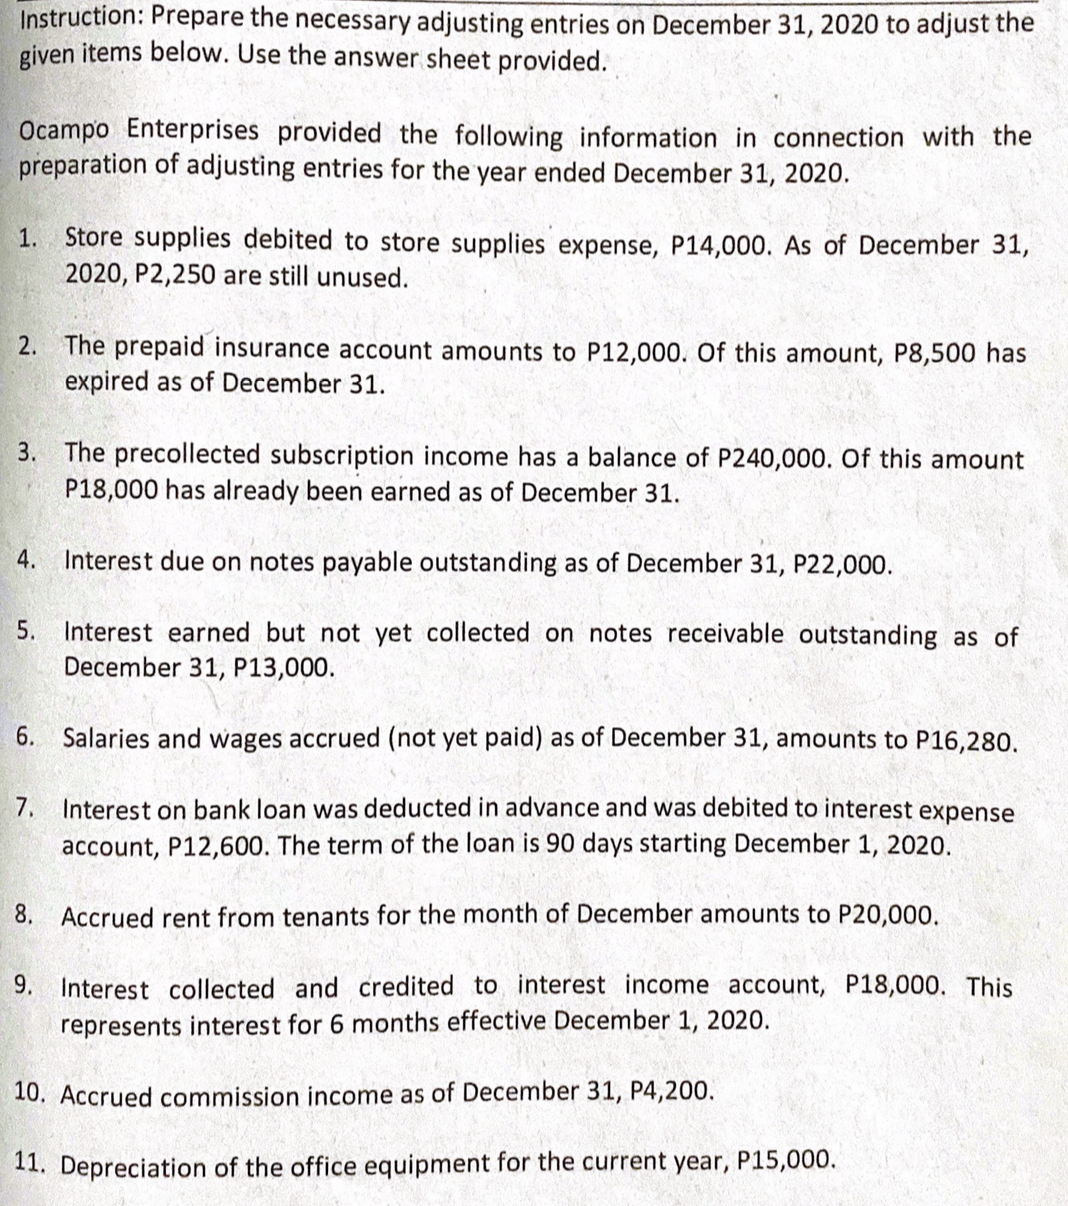 Instruction: Prepare the necessary adjusting entries on December 31, 2020 to adjust the
given items below. Use the answer sheet provided.
Ocampo Enterprises provided the following information in connection with the
preparation of adjusting entries for the year ended December 31, 2020.
Store supplies debited to store supplies expense, P14,000. As of December 31,
2020, P2,250 are still unused.
1.
2. The prepaid insurance account amounts to P12,000. Of this amount, P8,500 has
expired as of December 31.
3. The precollected subscription income has a balance of P240,000. Of this amount
P18,000 has already been earned as of December 31.
4.
Interest due on notes payable outstanding as of December 31, P22,000.
Interest earned but not yet collected on notes receivable outstanding as of
December 31, P13,000.
5.
6.
Salaries and wages accrued (not yet paid) as of December 31, amounts to P16,280.
7.
Interest on bank loan was deducted in advance and was debited to interest expense
account, P12,600. The term of the loan is 90 days starting December 1, 2020.
8. Accrued rent from tenants for the month of December amounts to P20,000.
9. Interest collected and credited to interest income account, P18,000. This
represents interest for 6 months effective December 1, 2020.
10. Accrued commission income as of December 31, P4,200.
11. Depreciation of the office equipment for the current year, P15,000.
